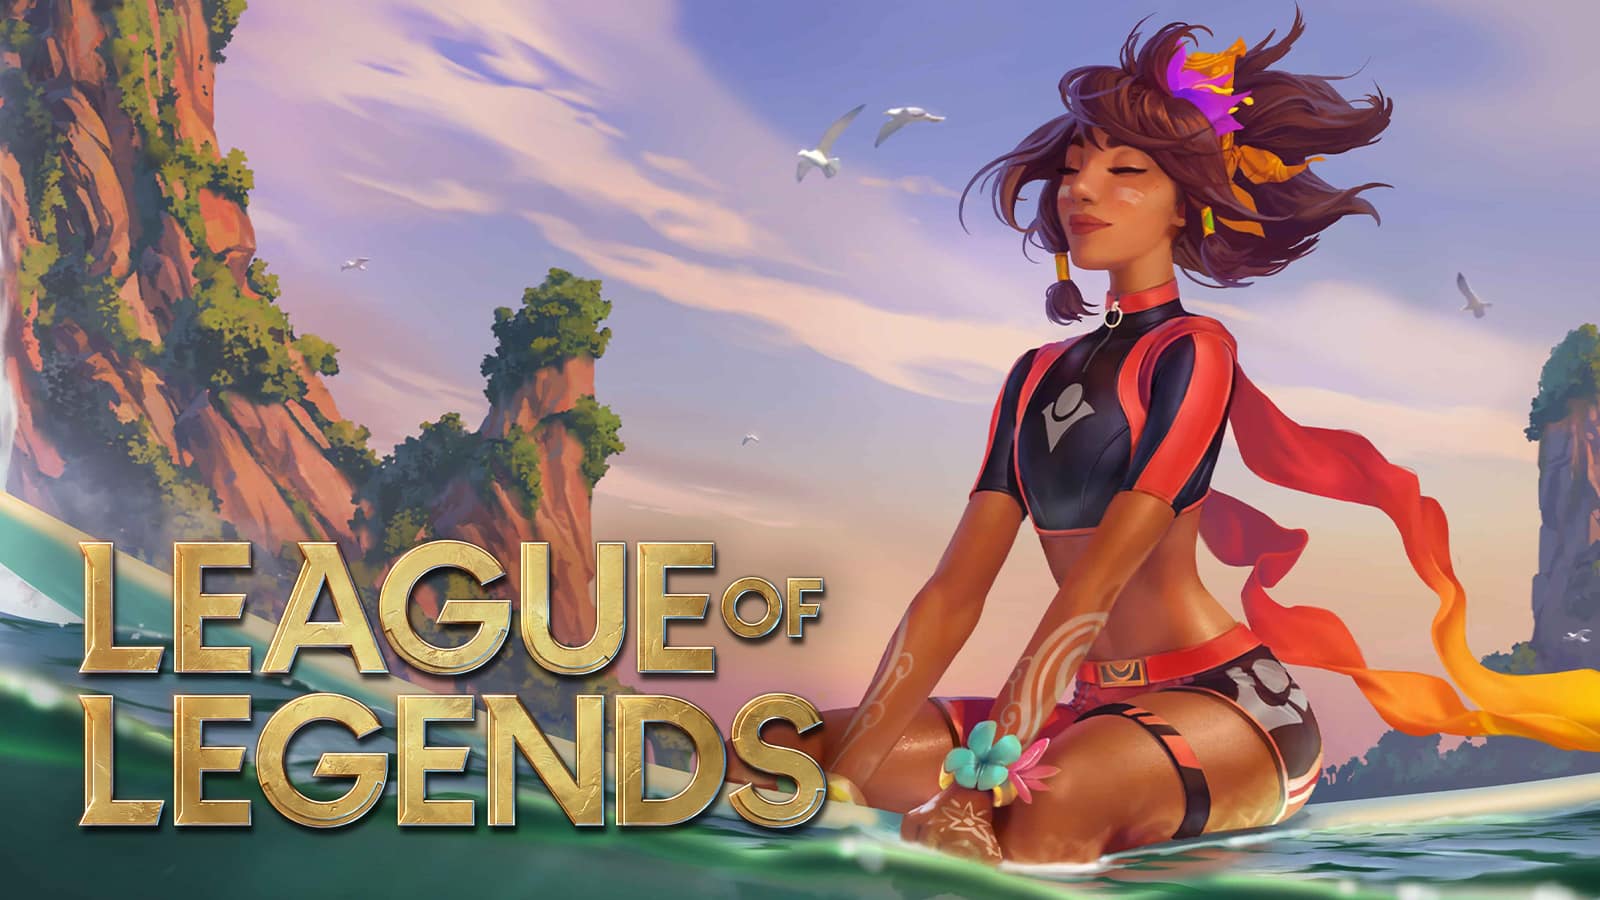 Pool Party Taliyah in League of Legends